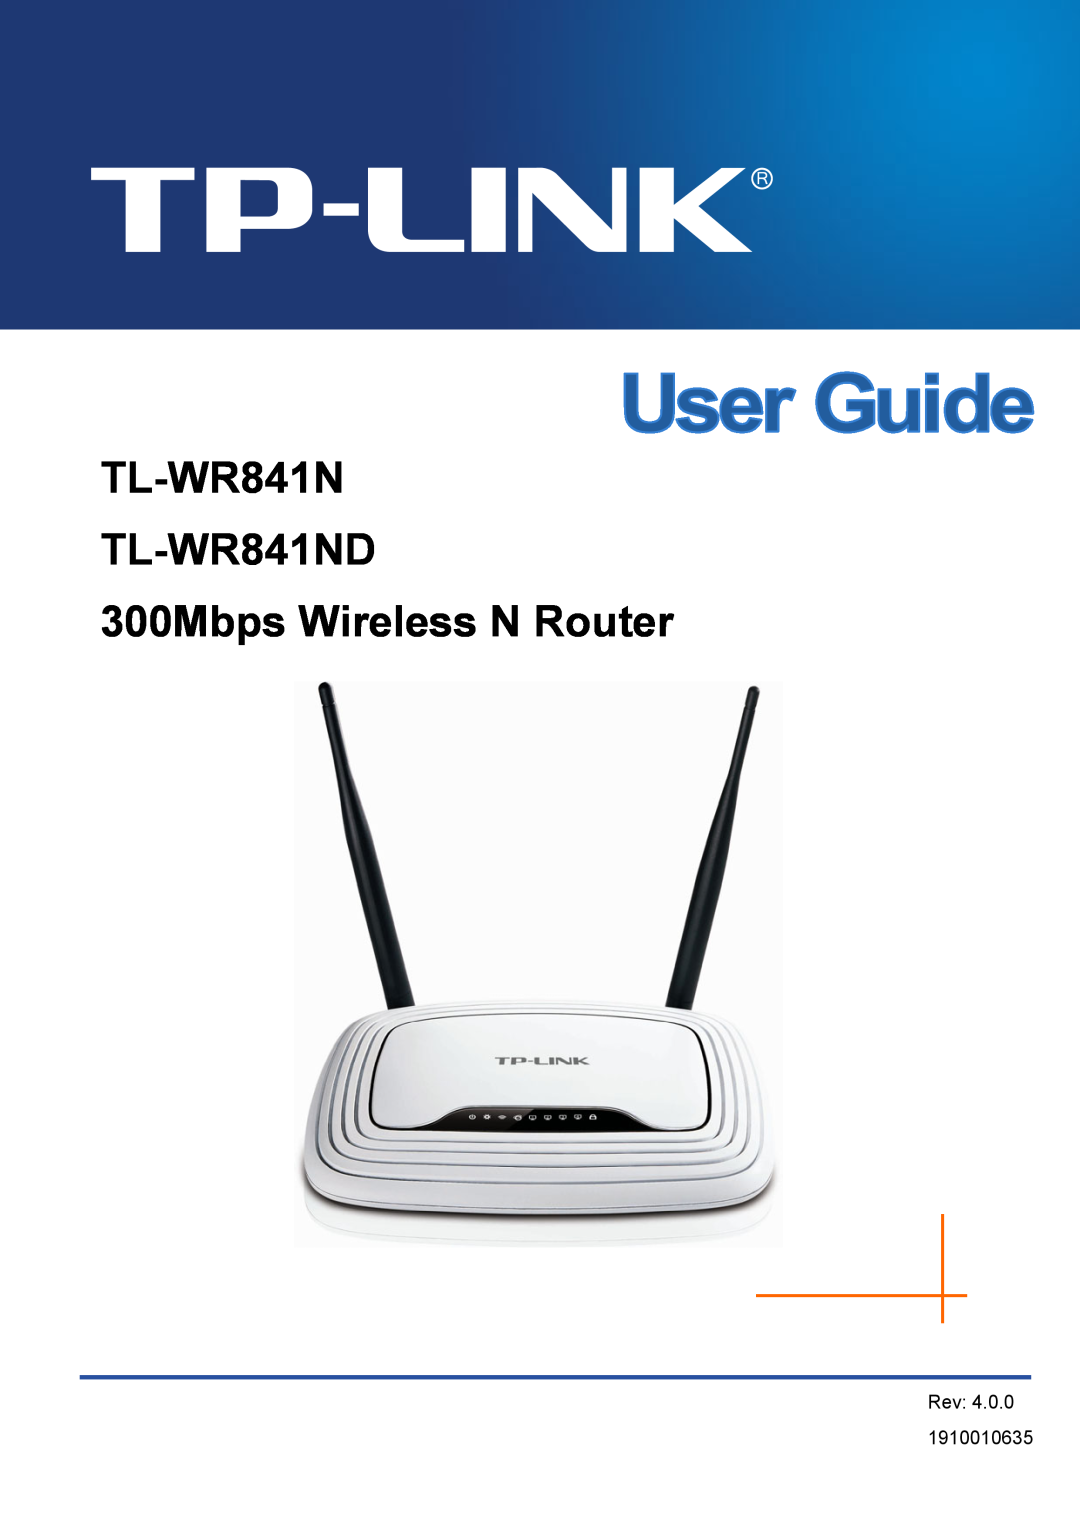 TP-Link manual TL-WR841N TL-WR841ND 300Mbps Wireless N Router, Rev 1910010635 